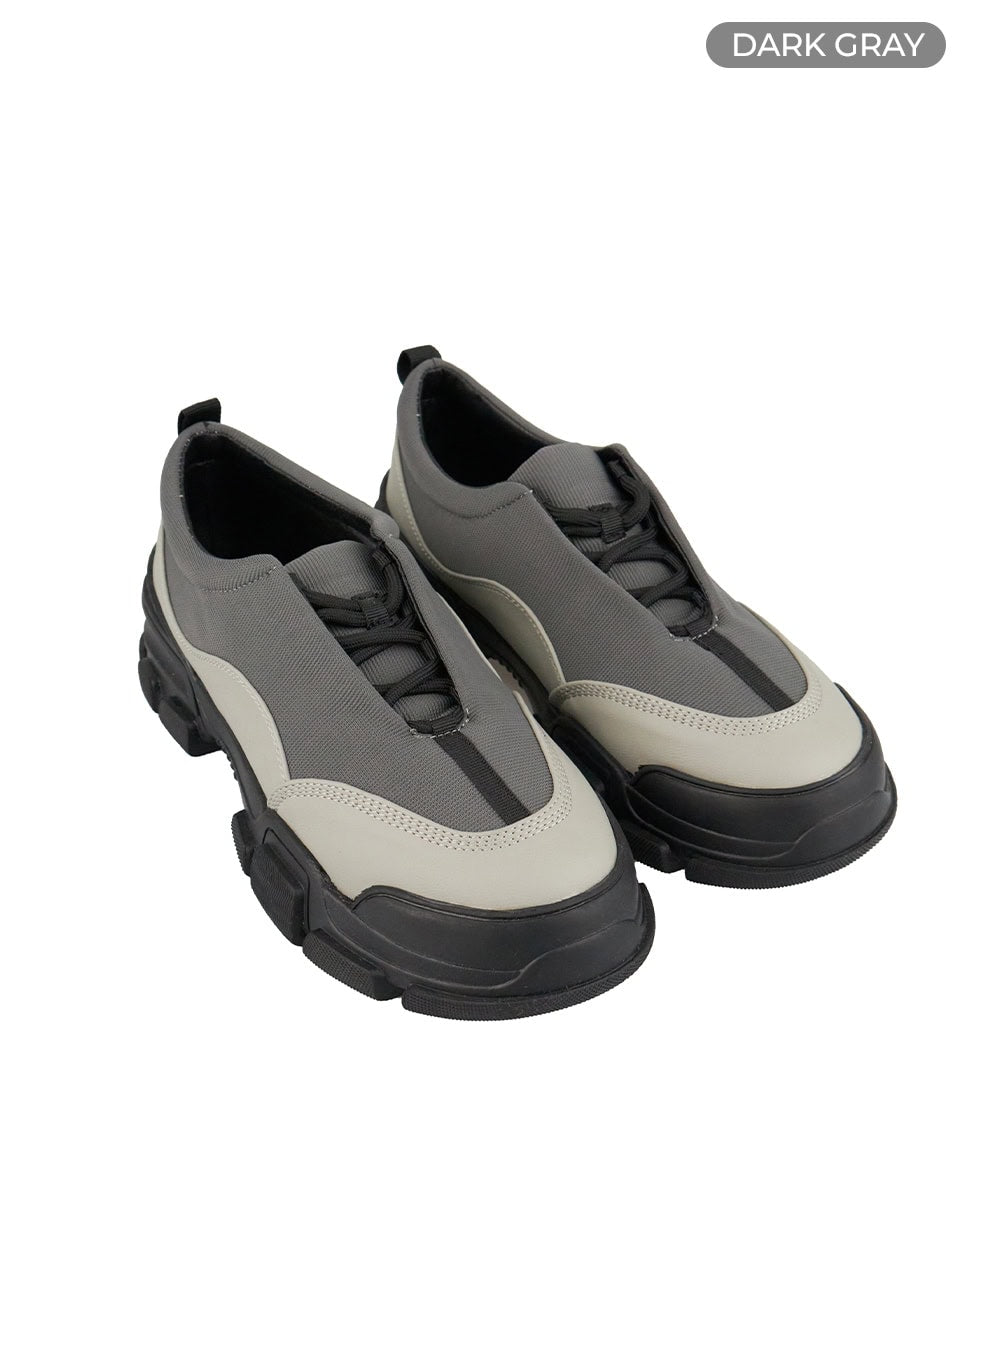 activewear-chunky-sneakers-il409 / Dark gray